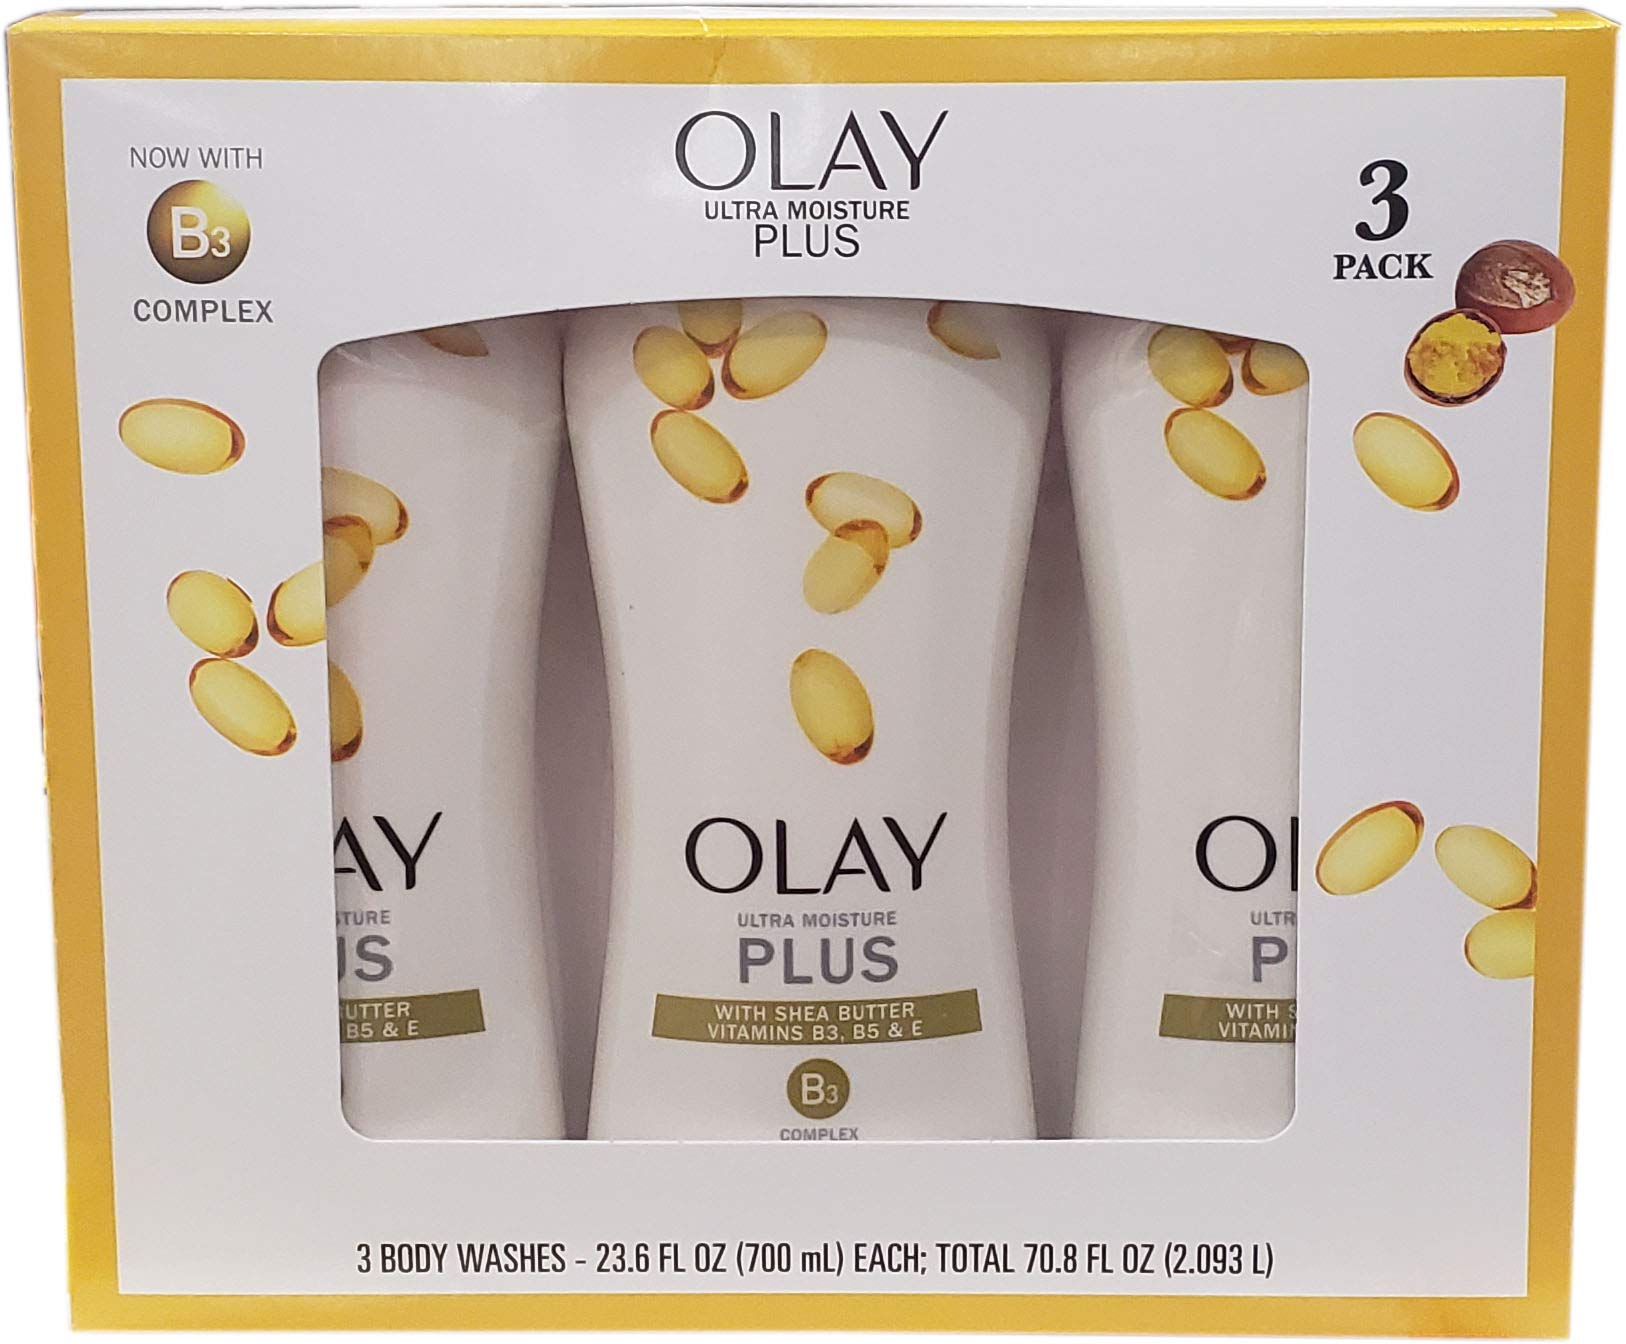 Olay Ultra Moisture Plus Body Wash 23.6 Oz, 3 Pack,, 3Count ()